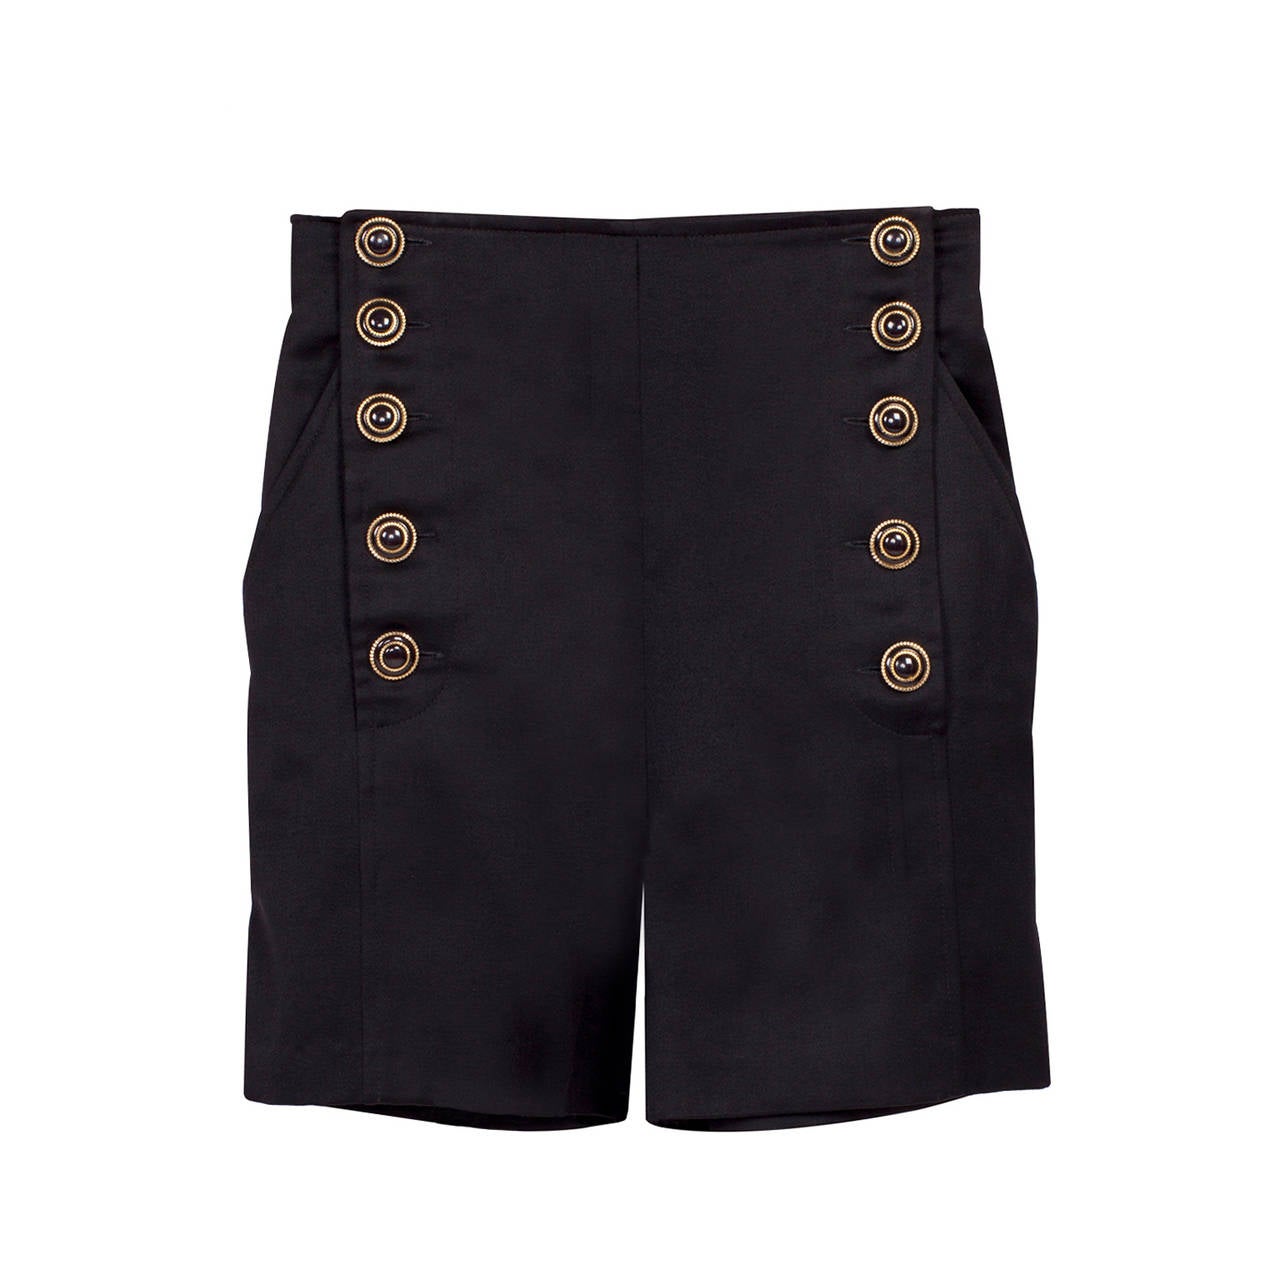 Versus Gianni Versace Black Marine High Waisted Shorts For Sale